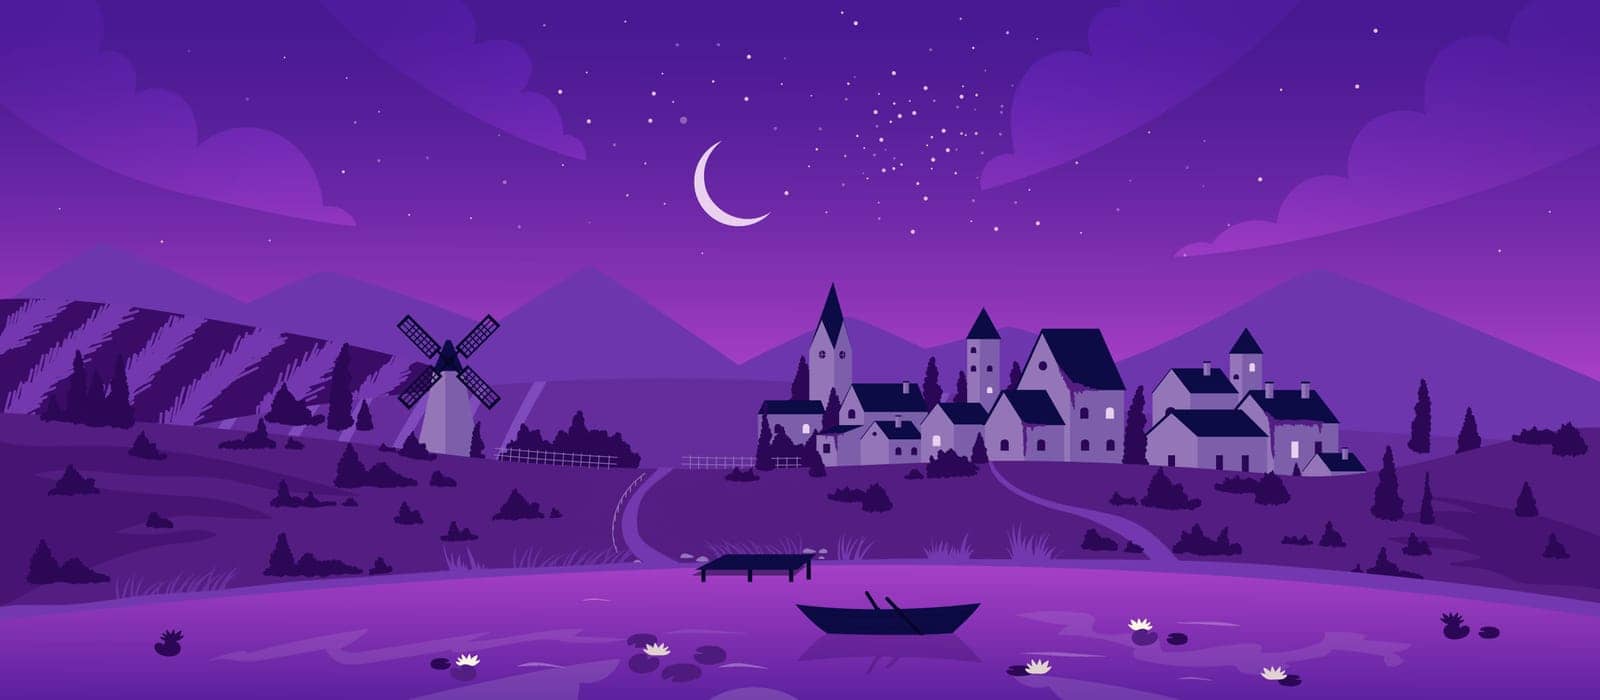 Night town or village by lake landscape vector illustration. Cartoon mountain scenery with moon in purple starry sky, boat on calm lake waters, mill on summer fields and farm houses background